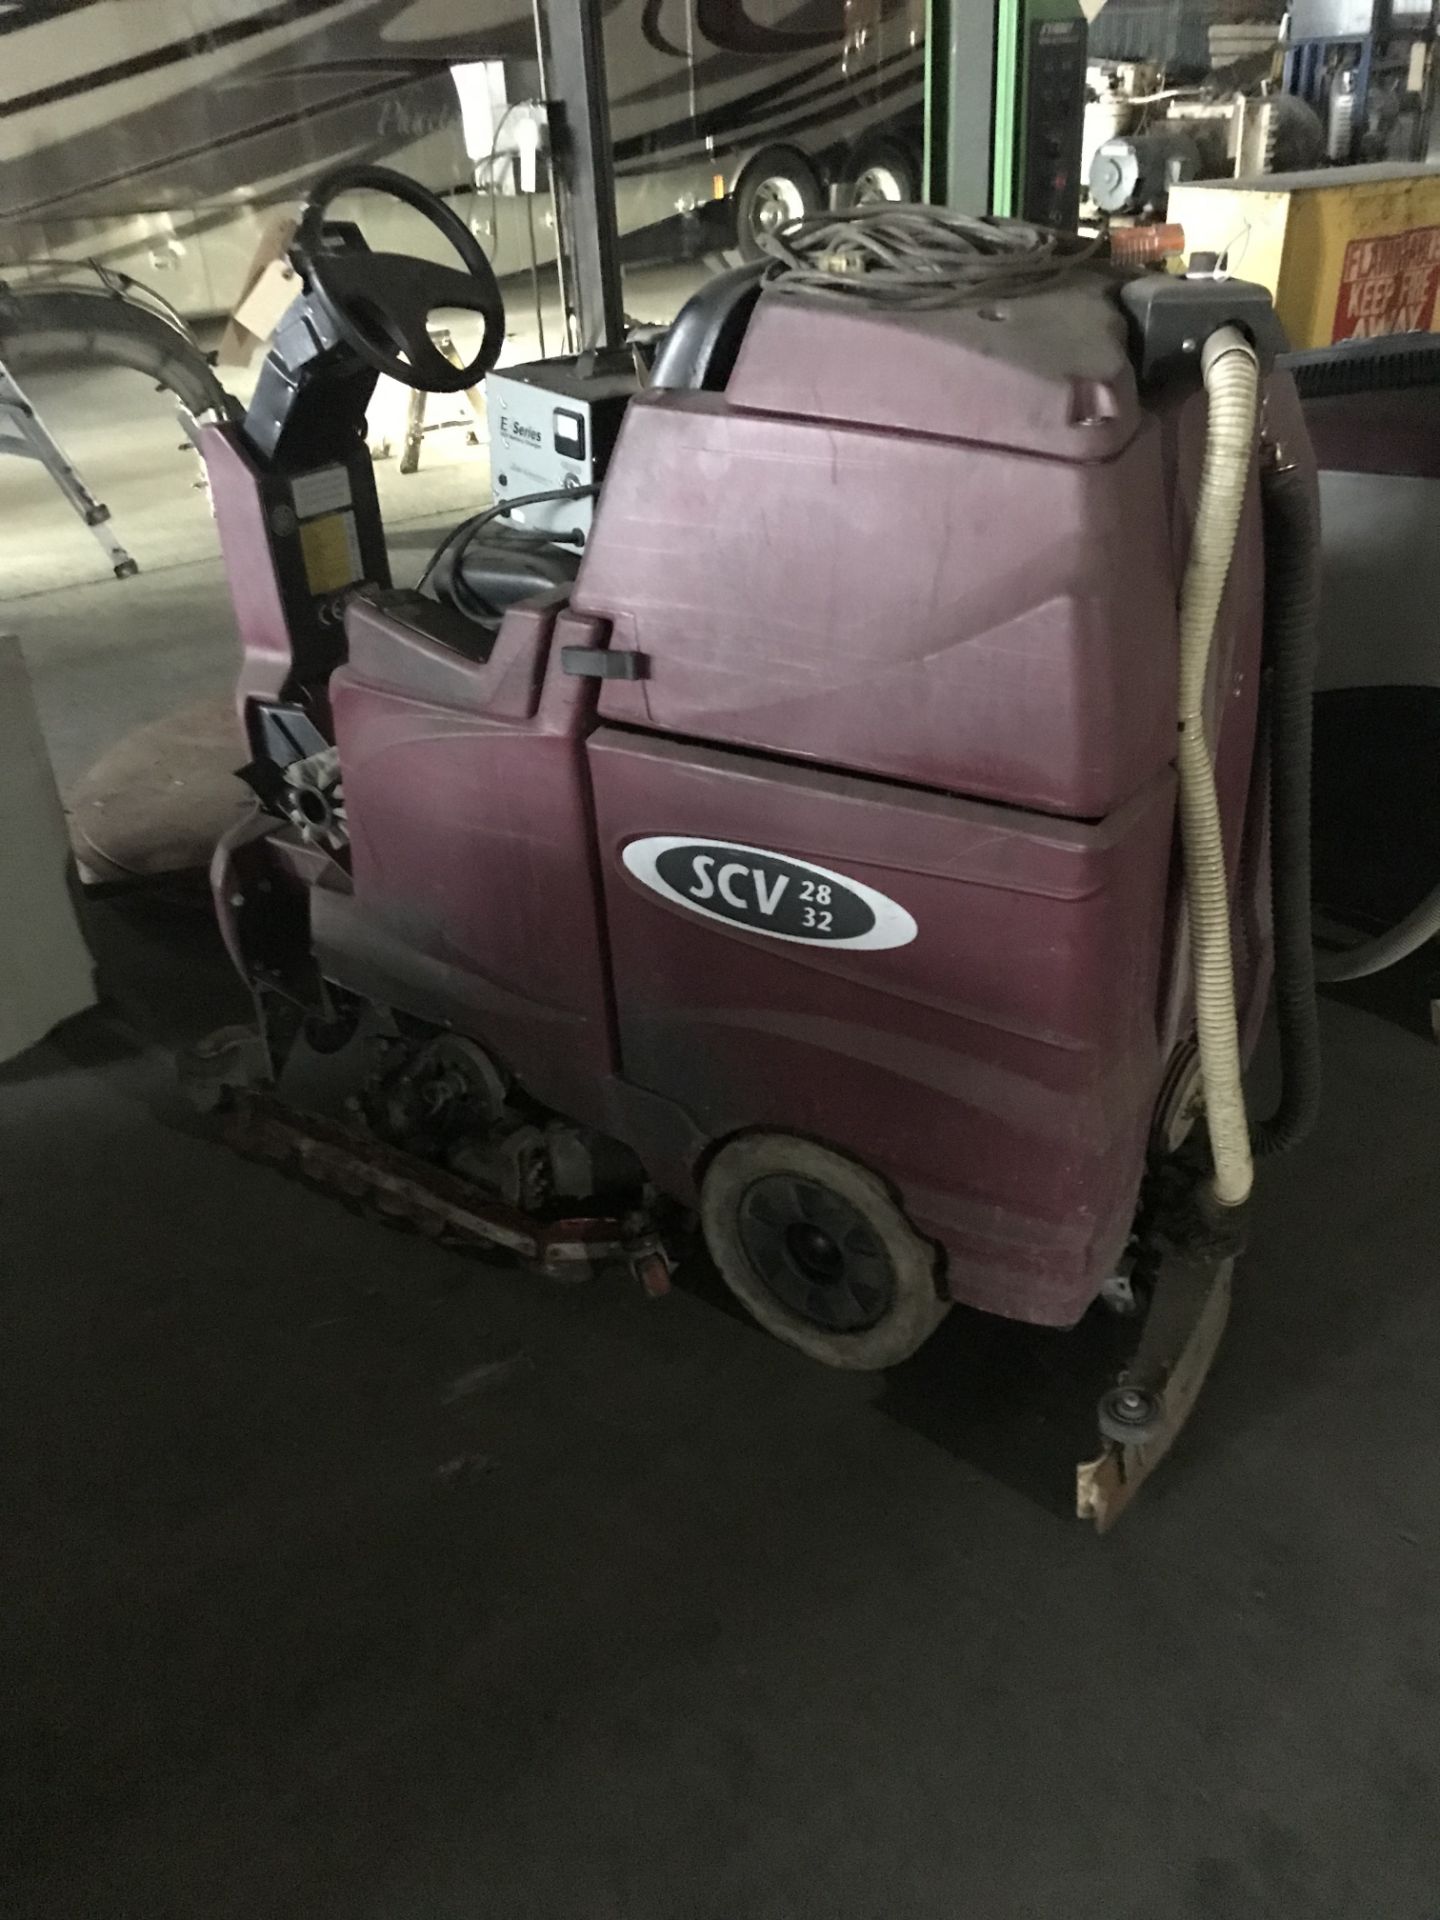 Minuteman SCV 2832 Floor Scrubber Unit, with Charger Unit